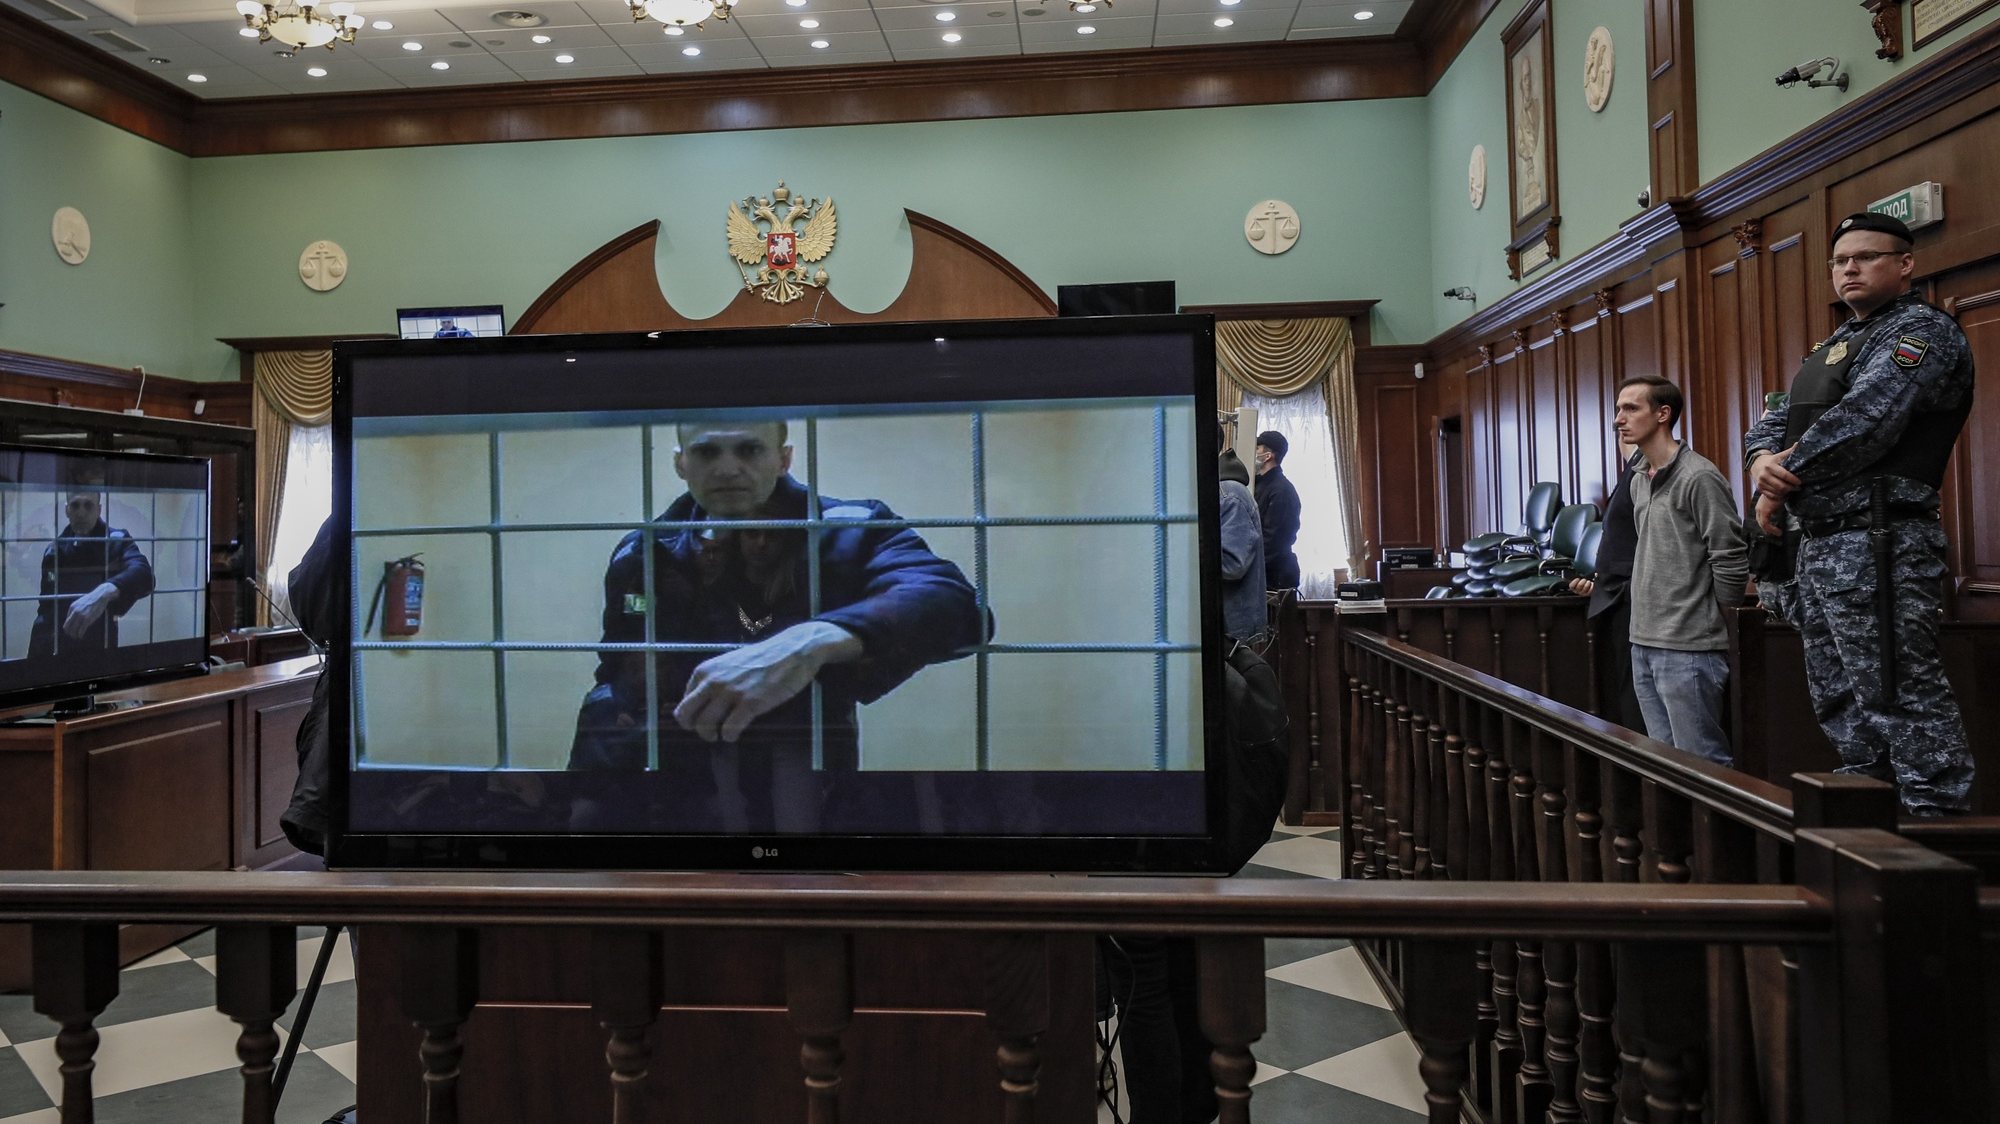 epa10364992 epa09971349 Russian opposition leader Alexei Navalny is shown on a monitor screen via video link from the penal colony No. 2 (IK-2) in Pokrov in Vladimir region, during a hearing of an appeal against Lefortovsky court sentence at the Moscow city court in Moscow, Russia, 24 May 2022. The Lefortovsky court sentenced politician Alexei Navalny to nine years in a strict regime colony and a fine of 1.2 million rubles for large-scale fraud and insulting the court. The Moscow city court upholded Navalny&#039;s conviction.  EPA/YURI KOCHETKOV  EPA-EFE/YURI KOCHETKOV